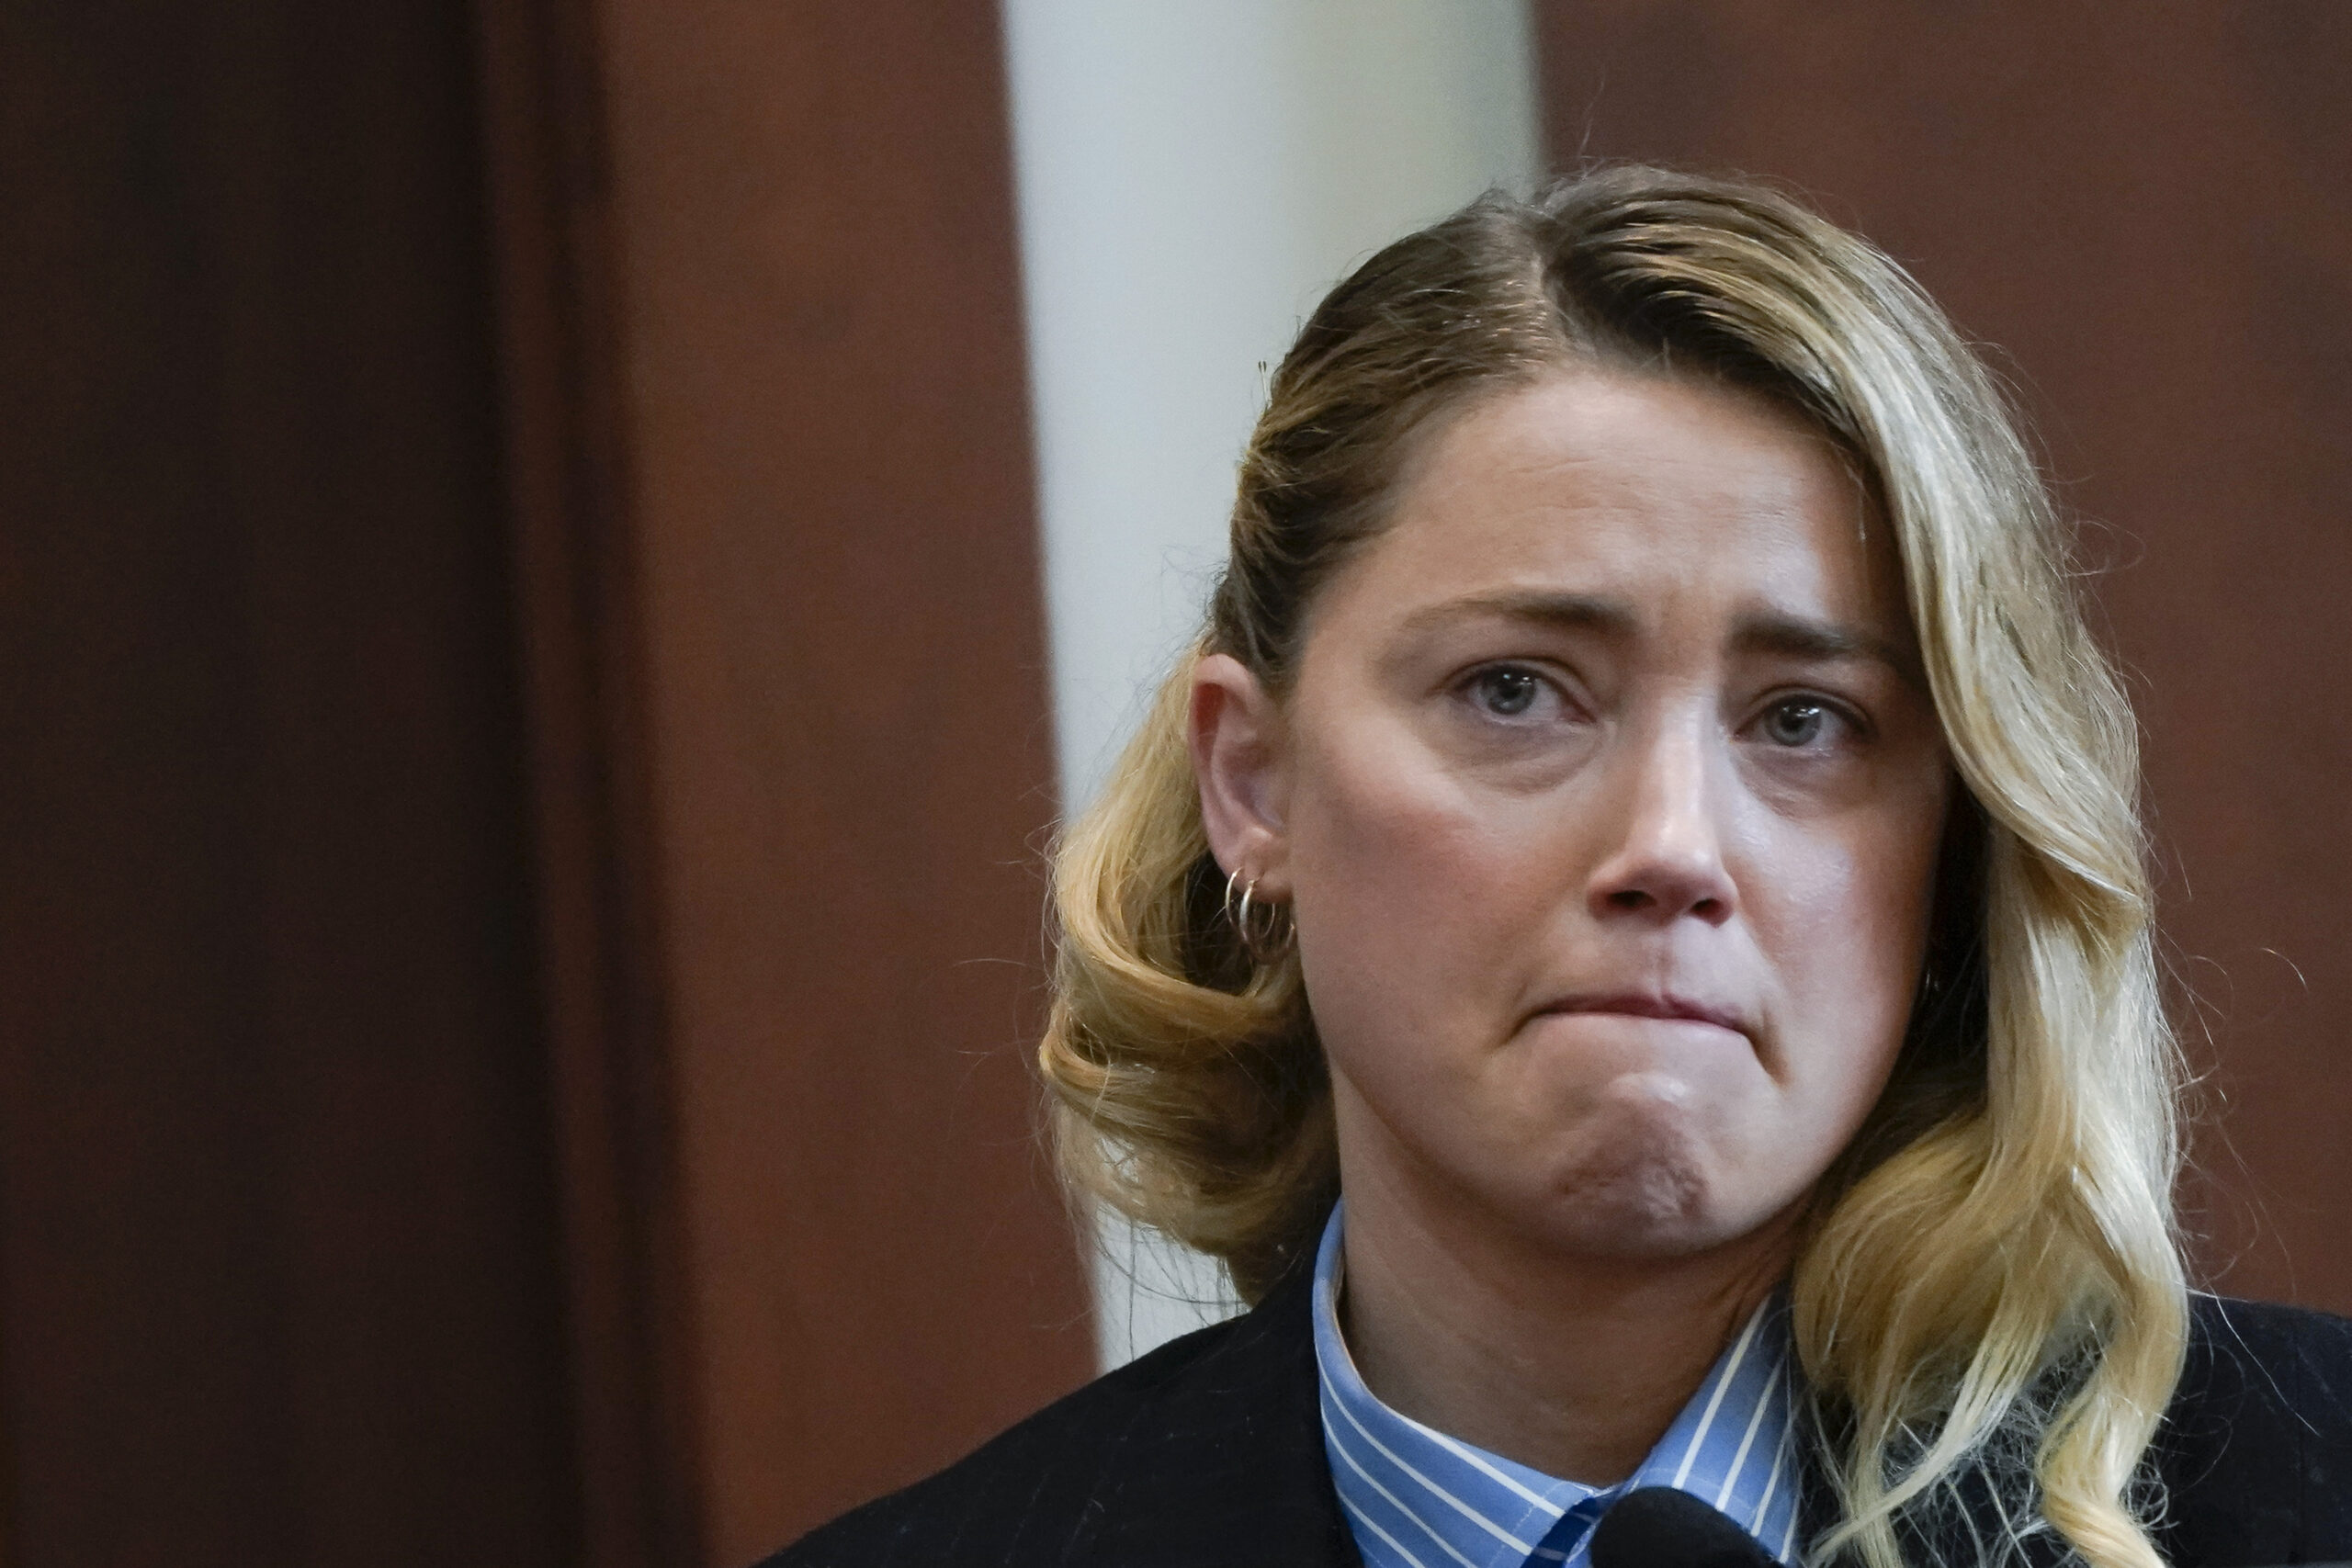 Actor Amber Heard testifies in the courtroom at the Fairfax County Circuit Court in Fairfax, Va., Wednesday May 4, 2022. Actor Johnny Depp sued his ex-wife Heard for libel in Fairfax County Circuit Court after she wrote an op-ed piece in The Washington Post in 2018 referring to herself as a "public figure representing domestic abuse." (Elizabeth Frantz/Pool Photo via AP)